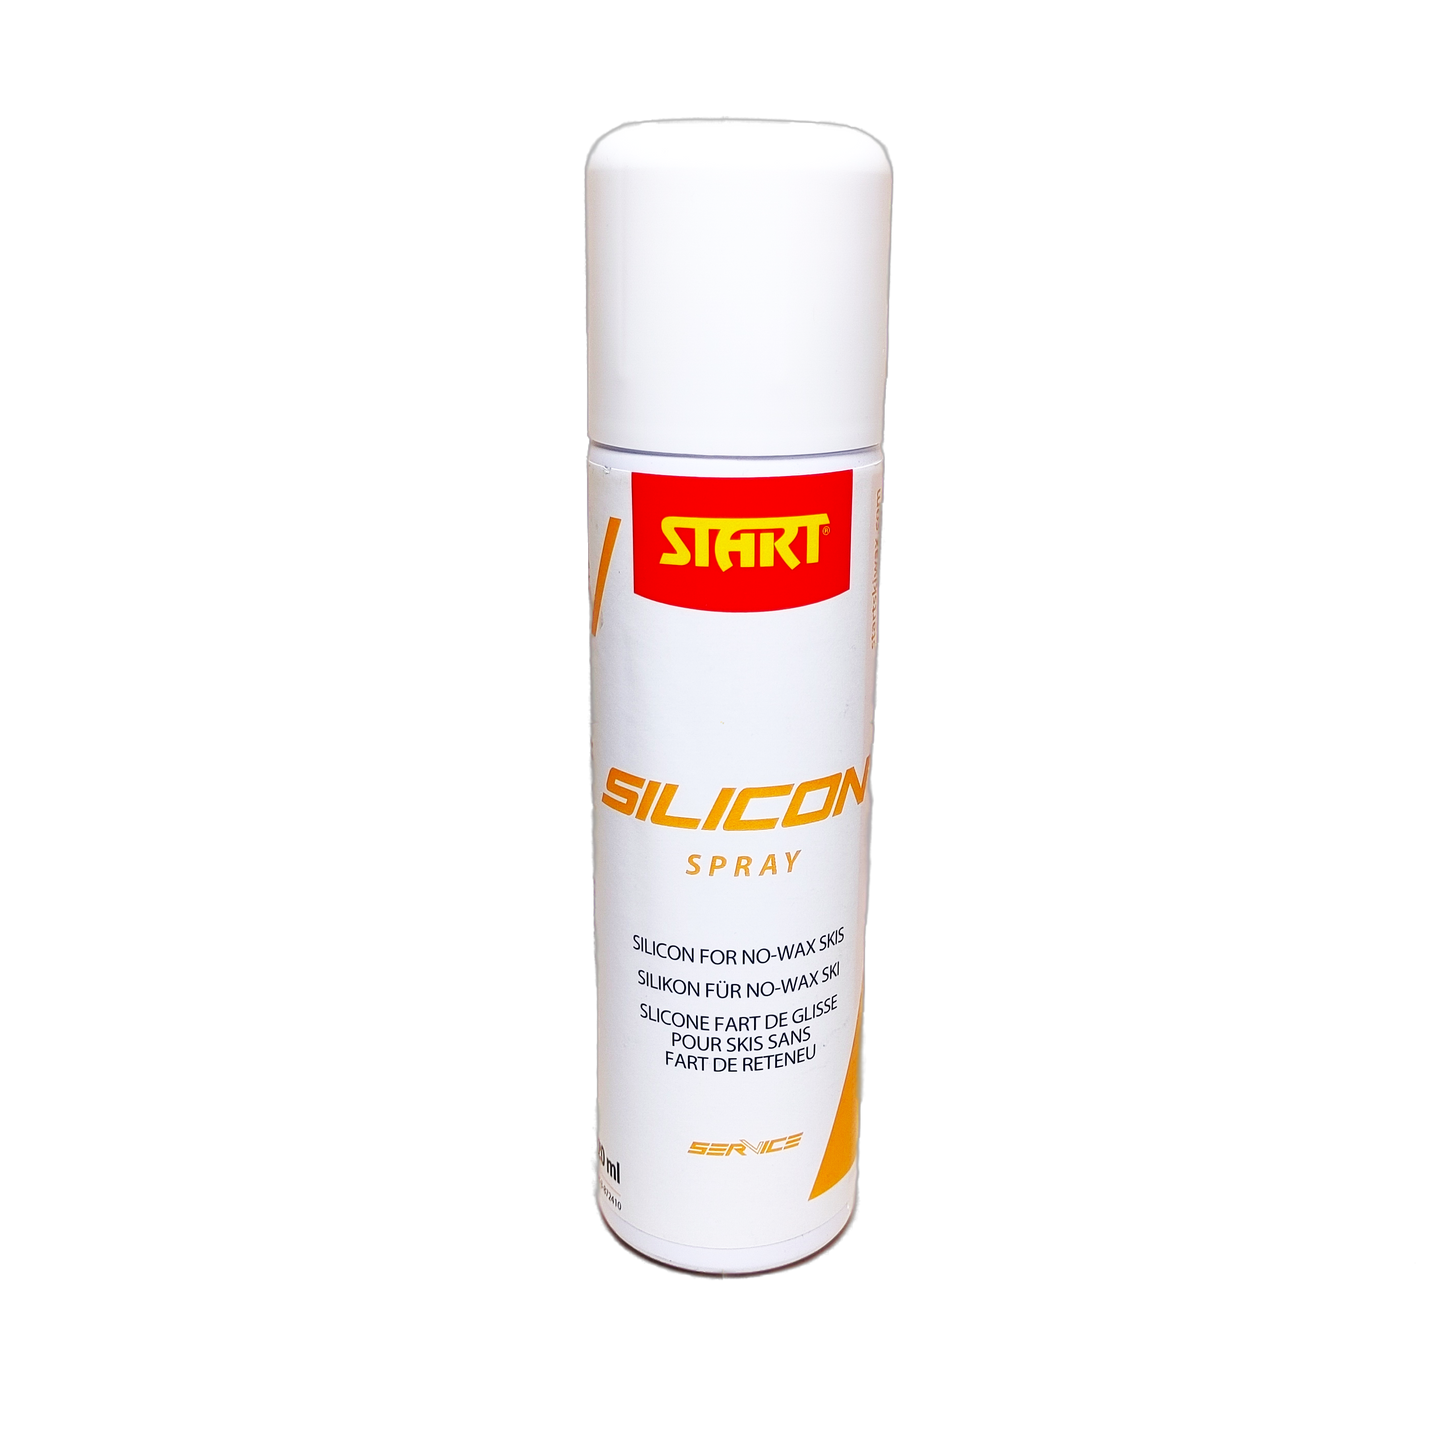 A product picture of the Start Silicon Spray